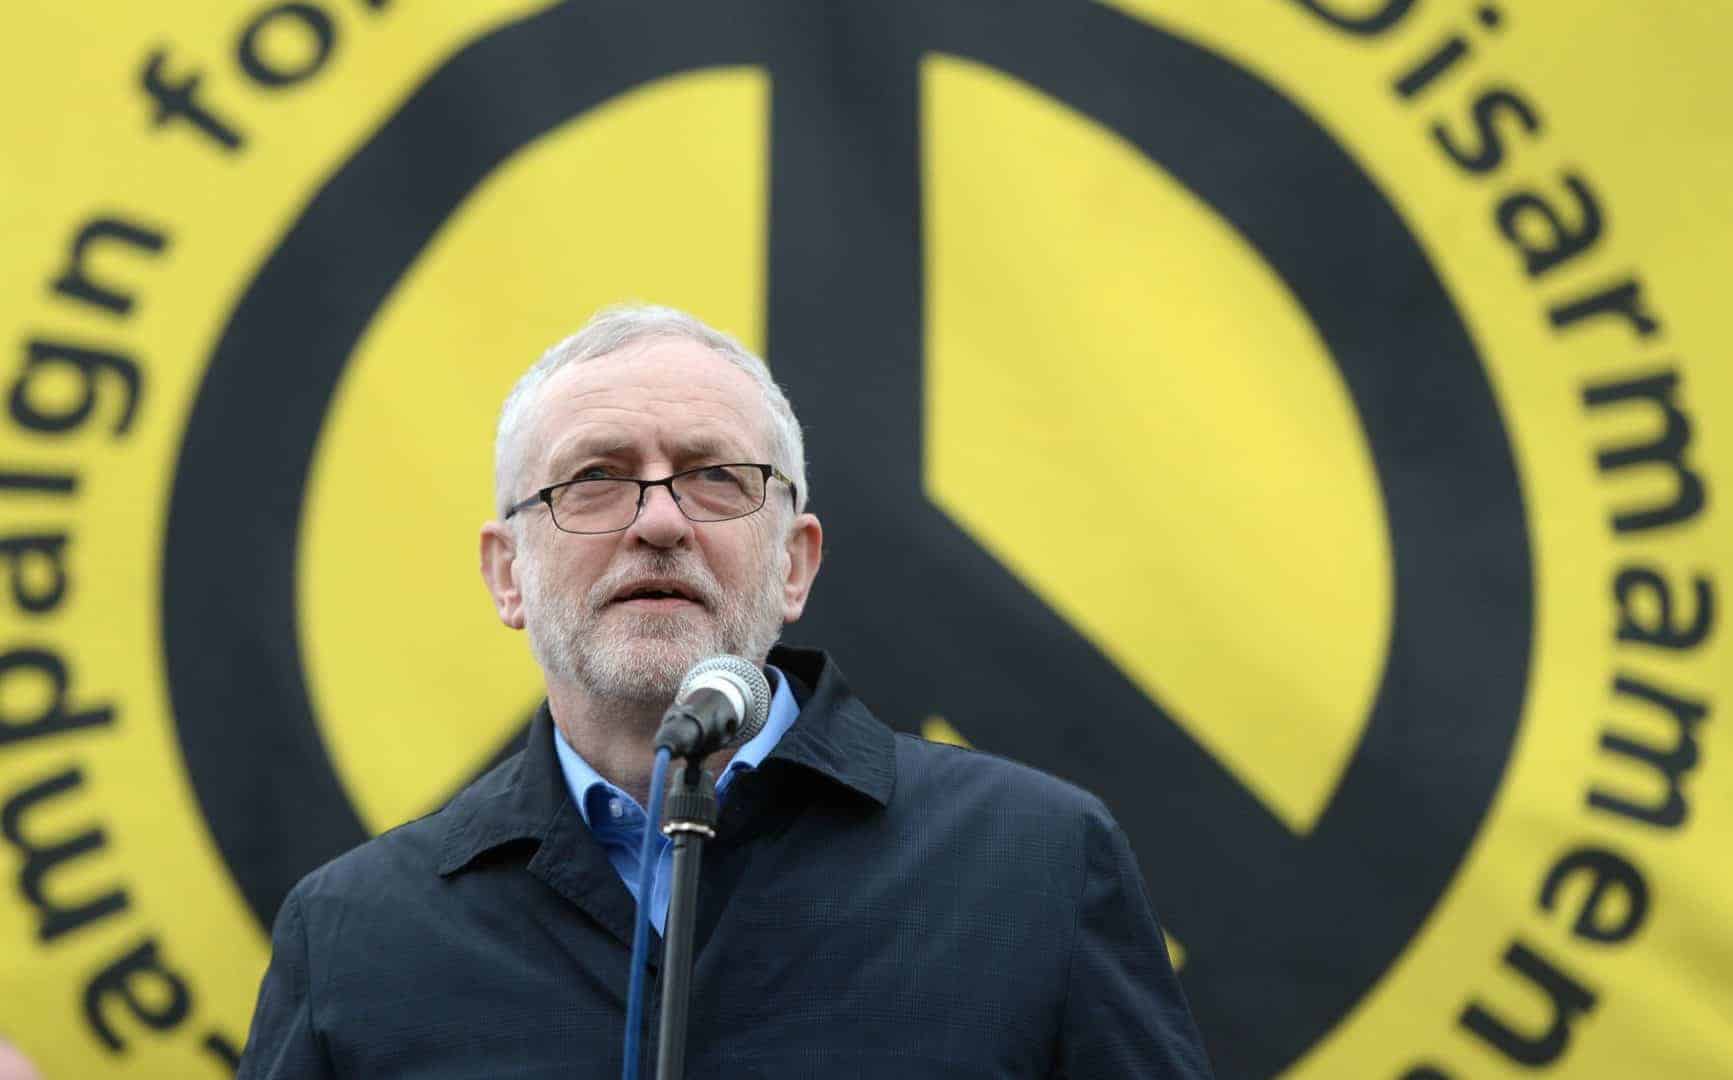 Jeremy Corbyn addresses ‘No War on Iran’ rally as people demonstrate against war around UK